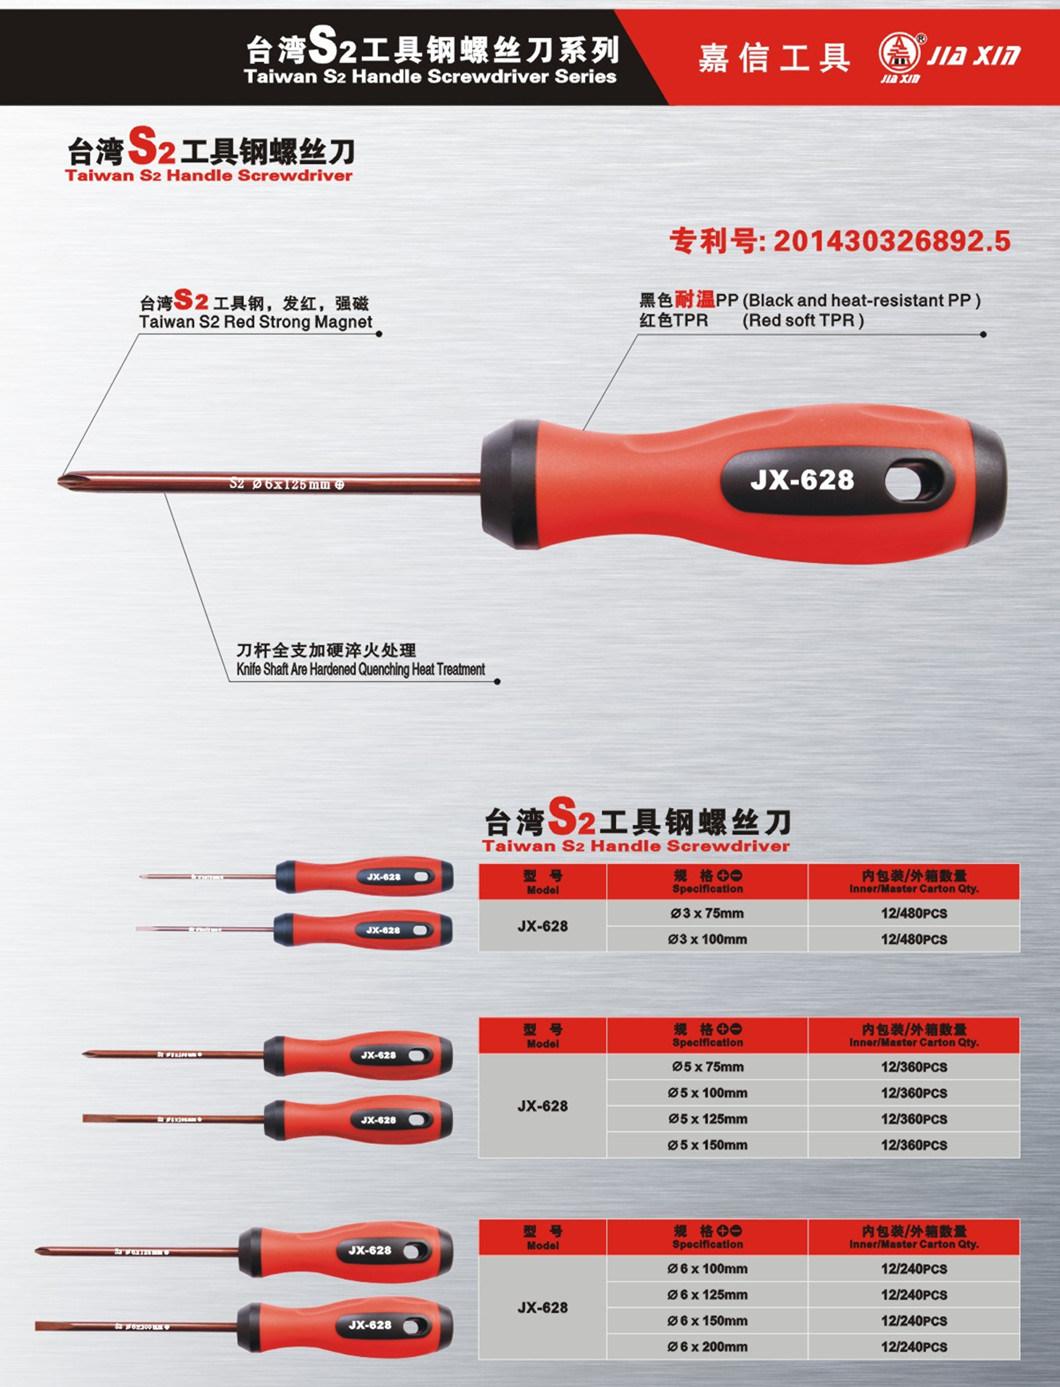 Magnetic Screwdriver with Increased Torque Hole and Full Support with Hardened Batch Rod